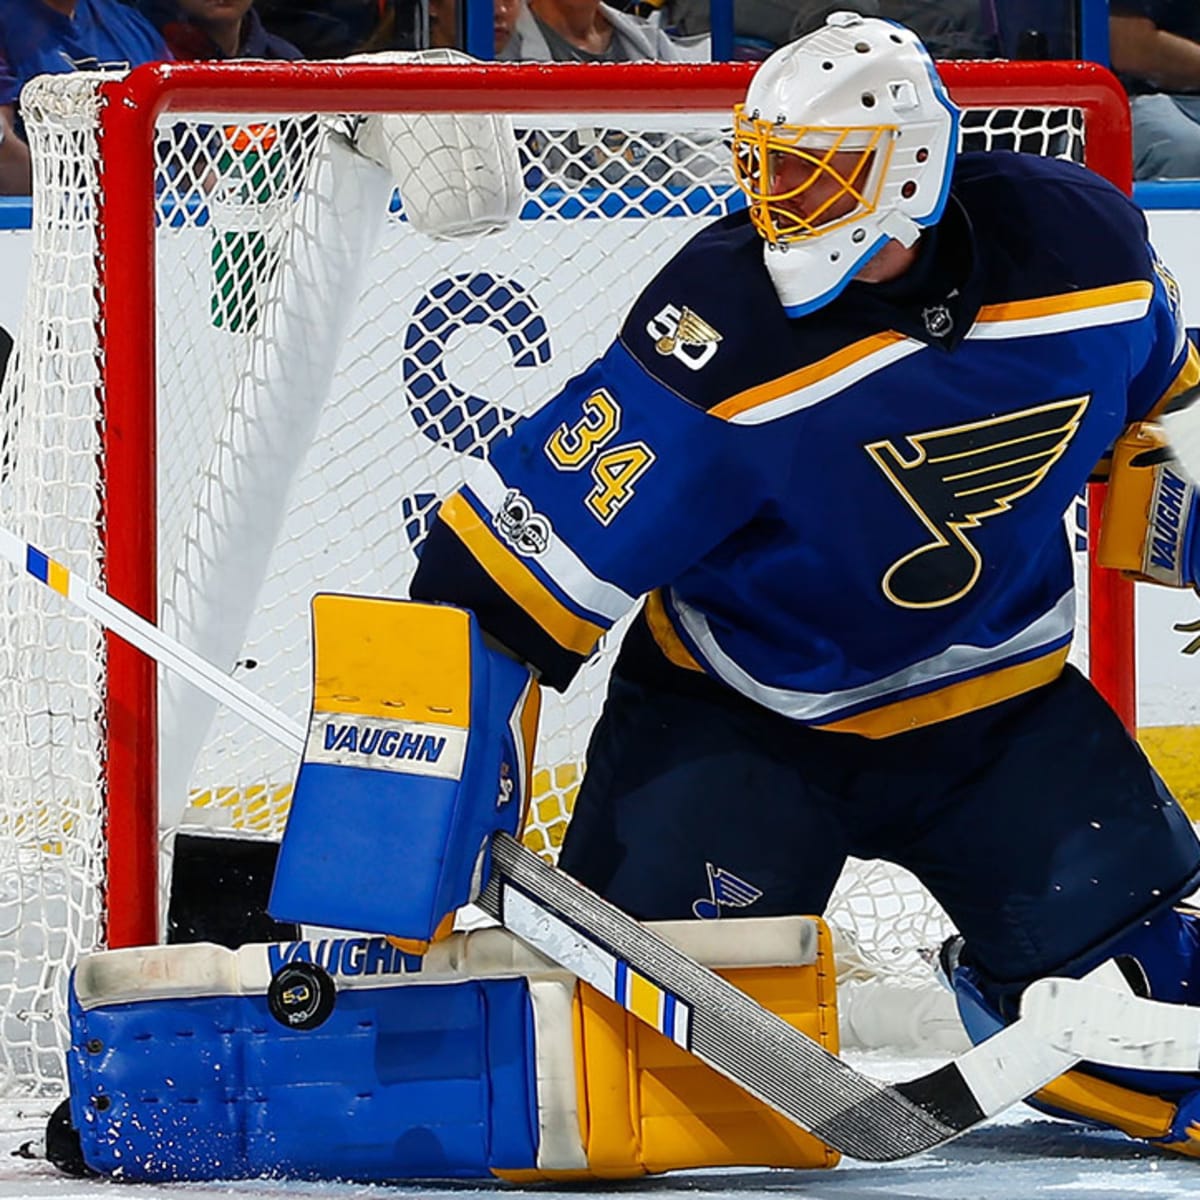 St. Louis Blues goalie Jake Allen accepted backup role a while